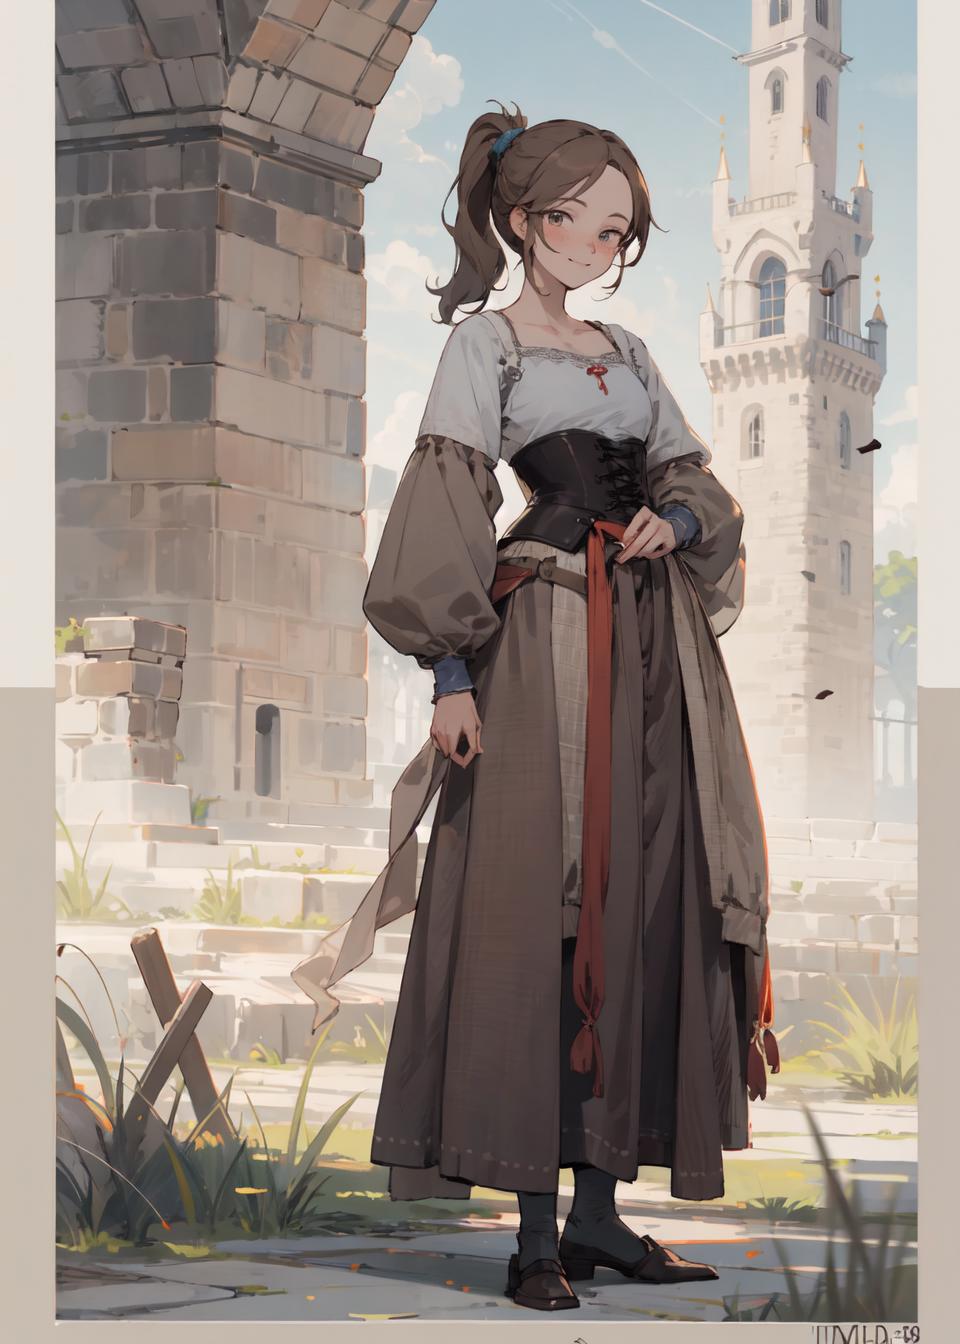 Medieval Commoners Clothes image by Menfan